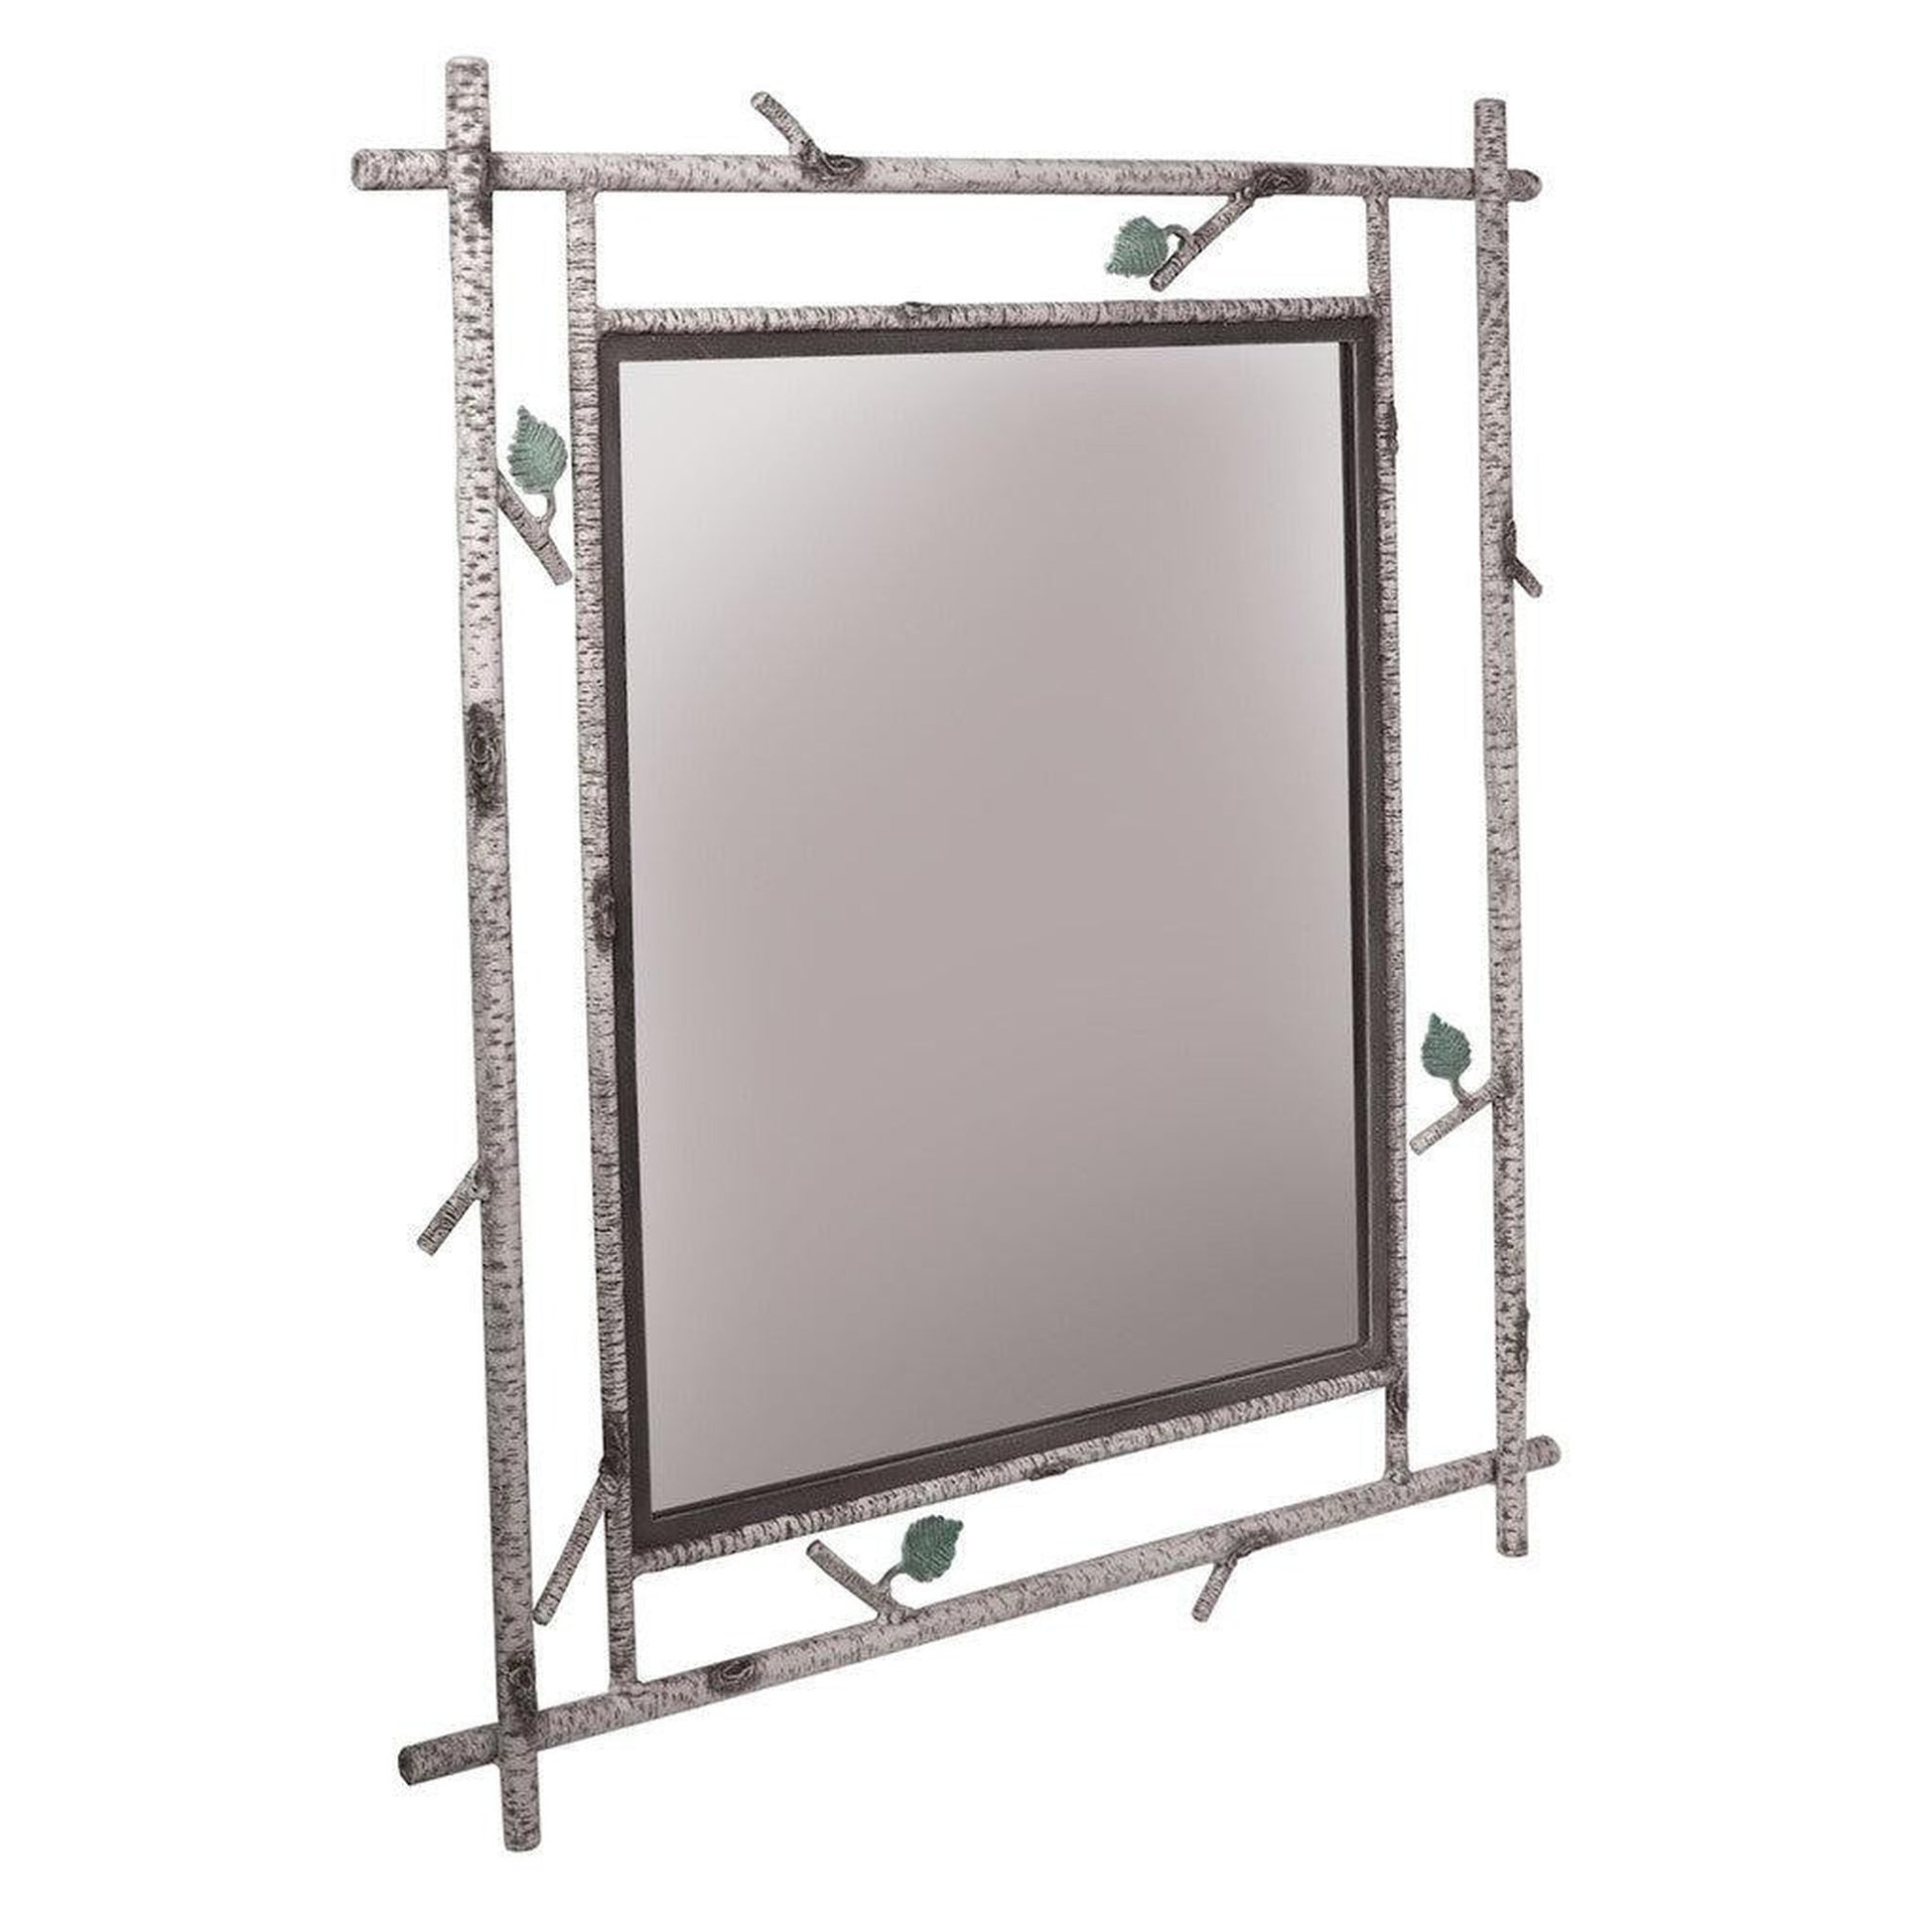 Stone County Ironworks Whisper Creek 35" x 47" Large Hand Rubbed Bronze Iron Wall Mirror